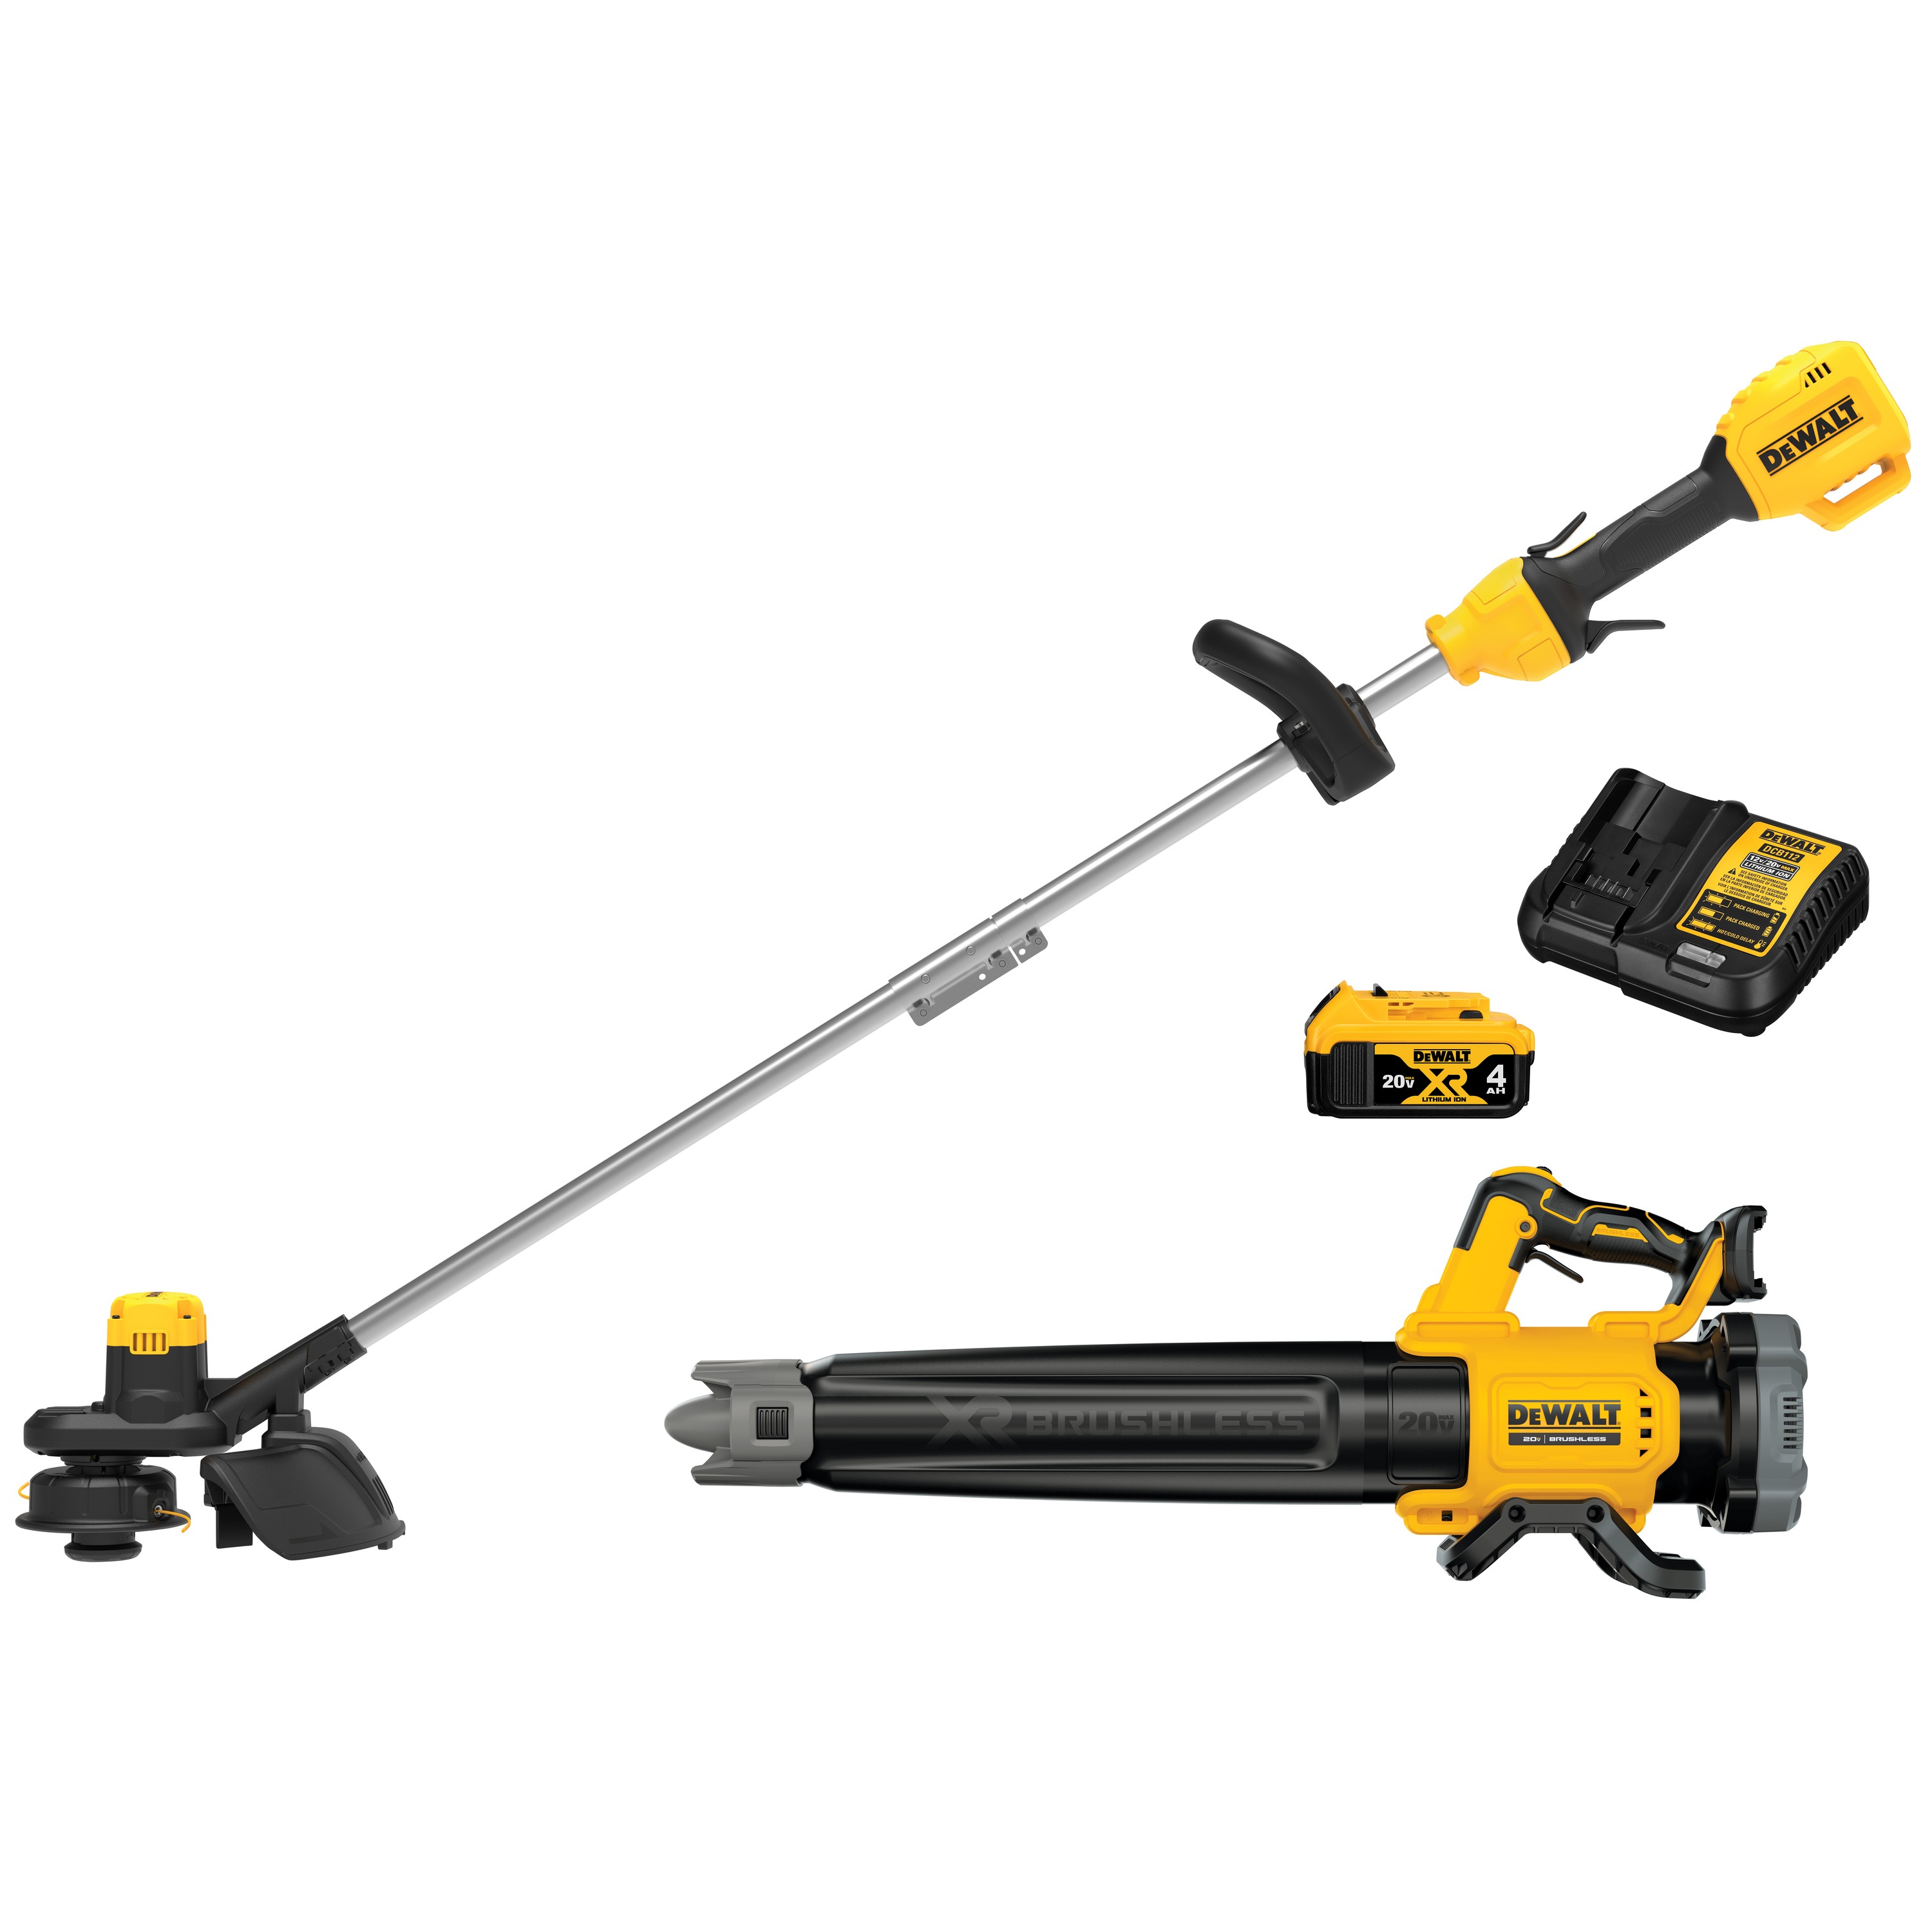 Profile of XR brushless cordless string trimmer and blower combo kit